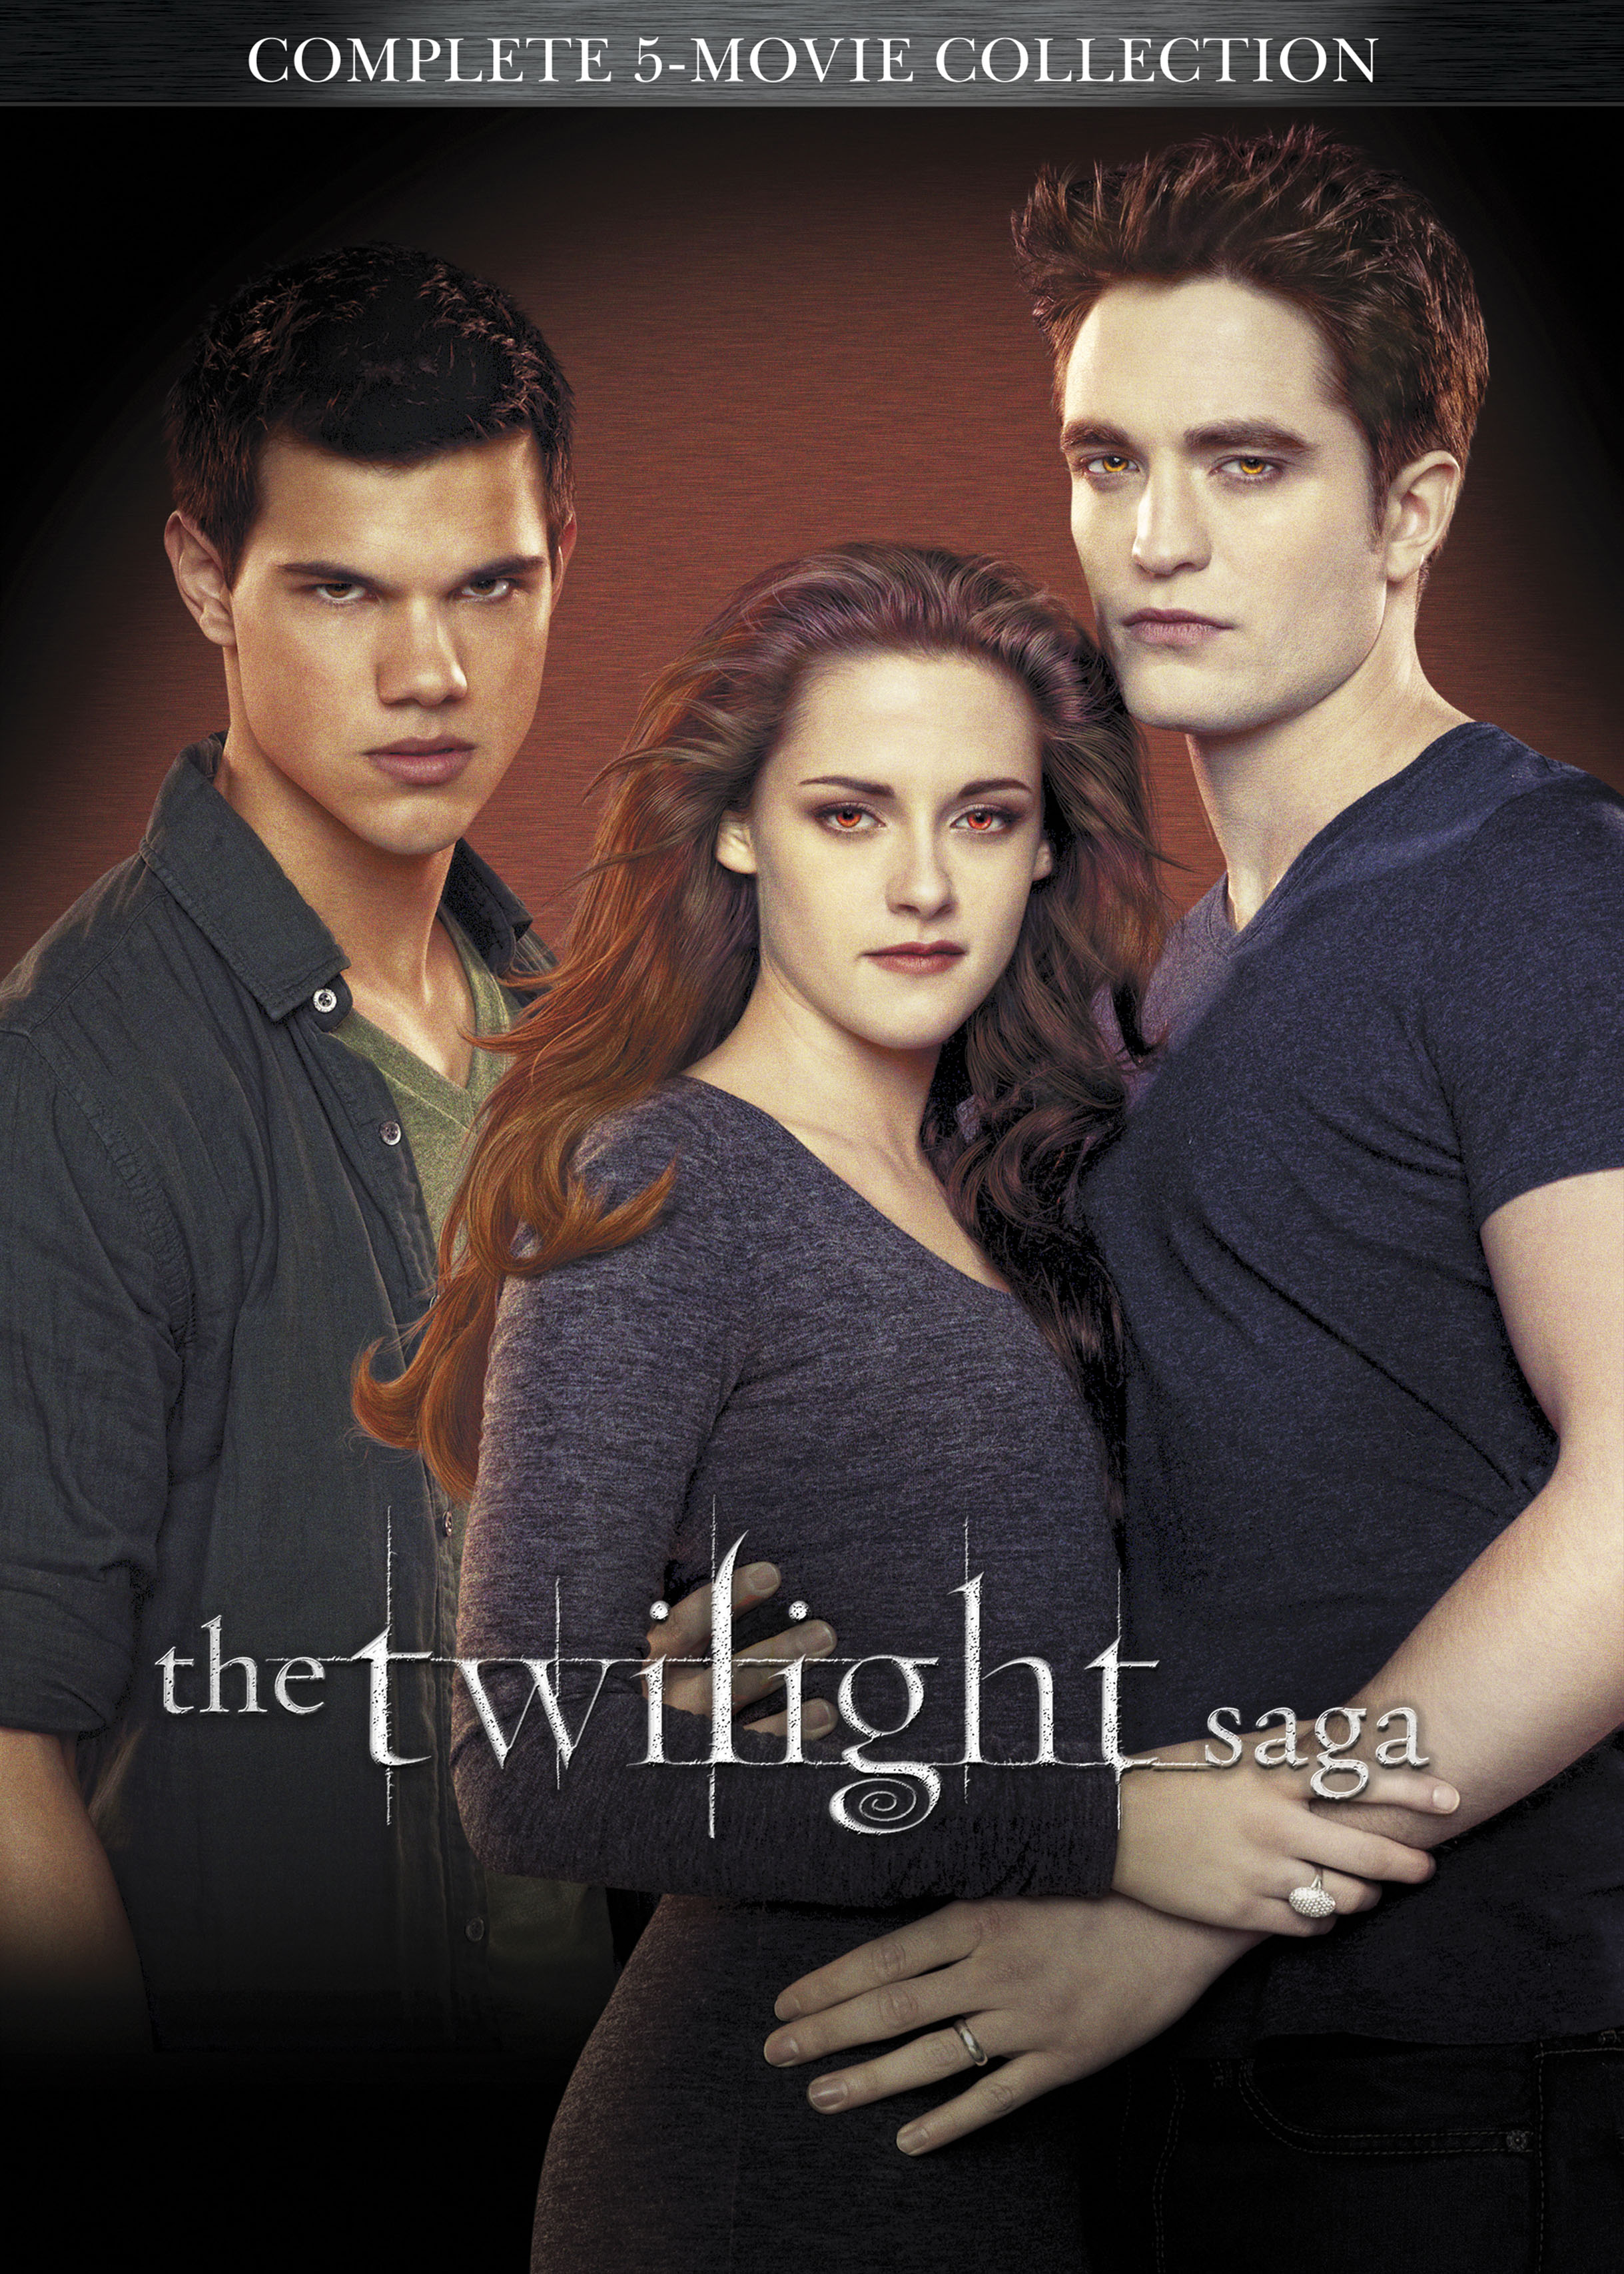 The Twilight Saga: Complete 5-Movie Collection [DVD] - Best Buy